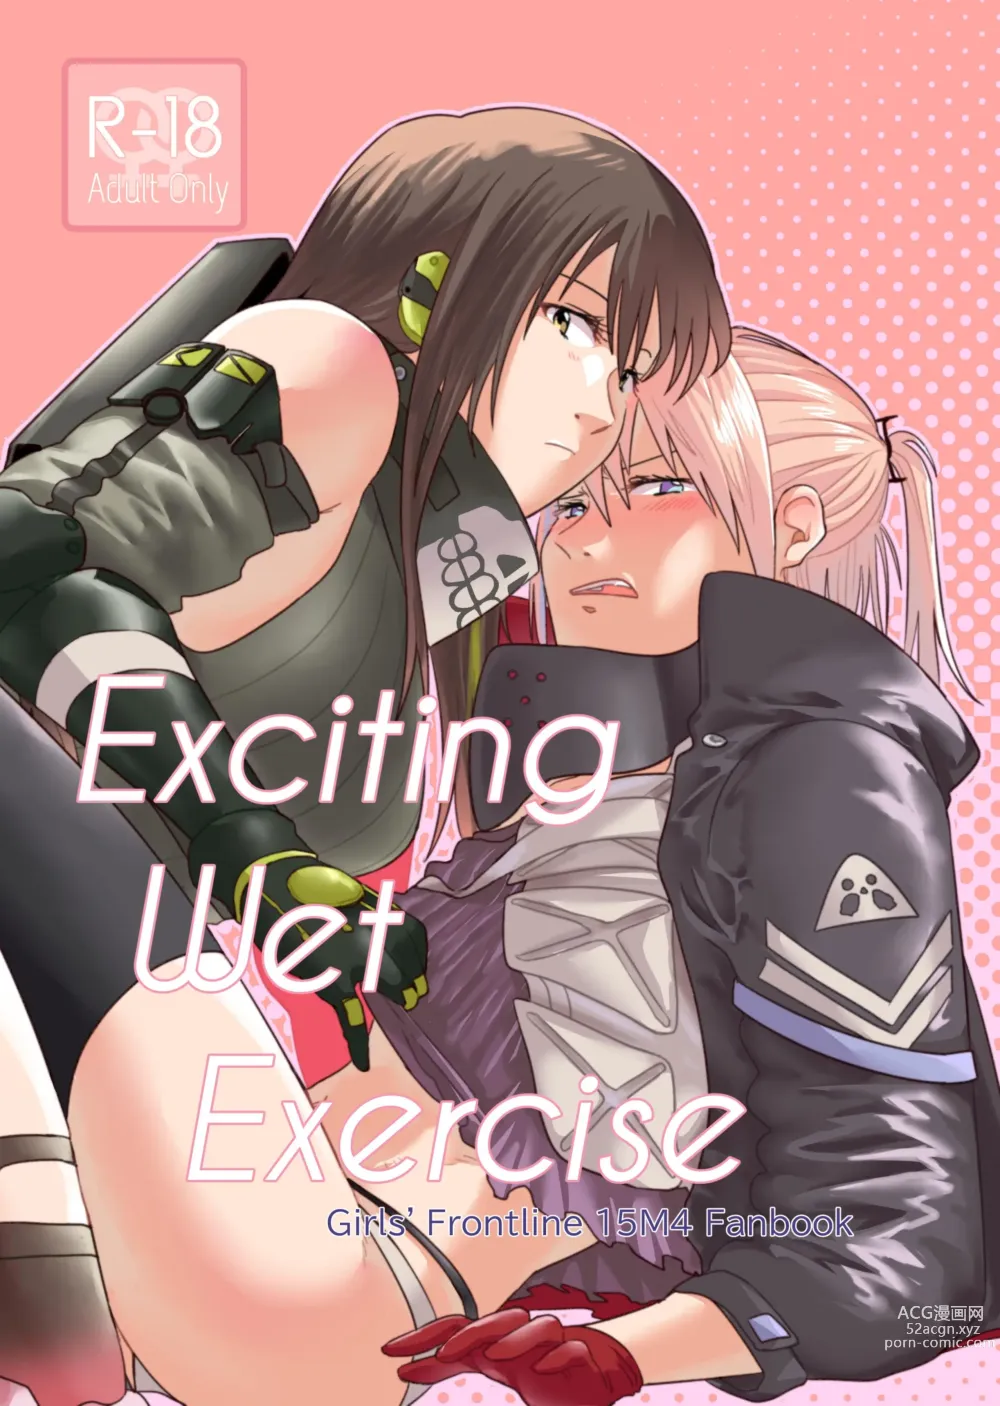 Page 1 of doujinshi Exciting Wet Exercise